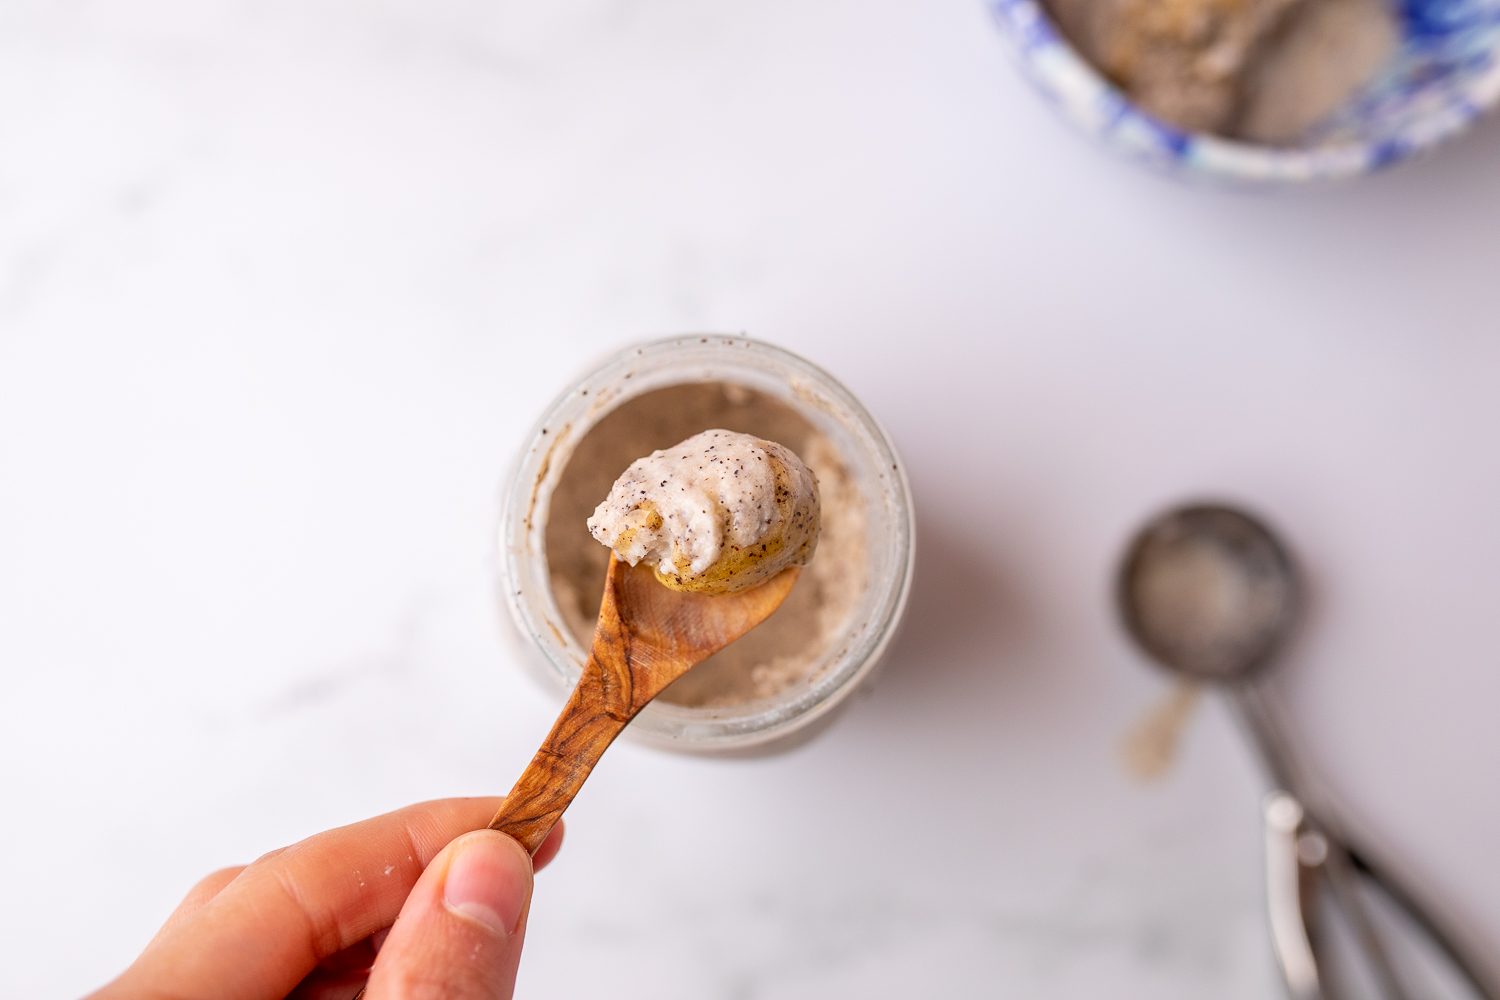 Bird's eye view of a hand holding a small wooden spoon, scooping out a creamy gelato from the top of a mason jar.